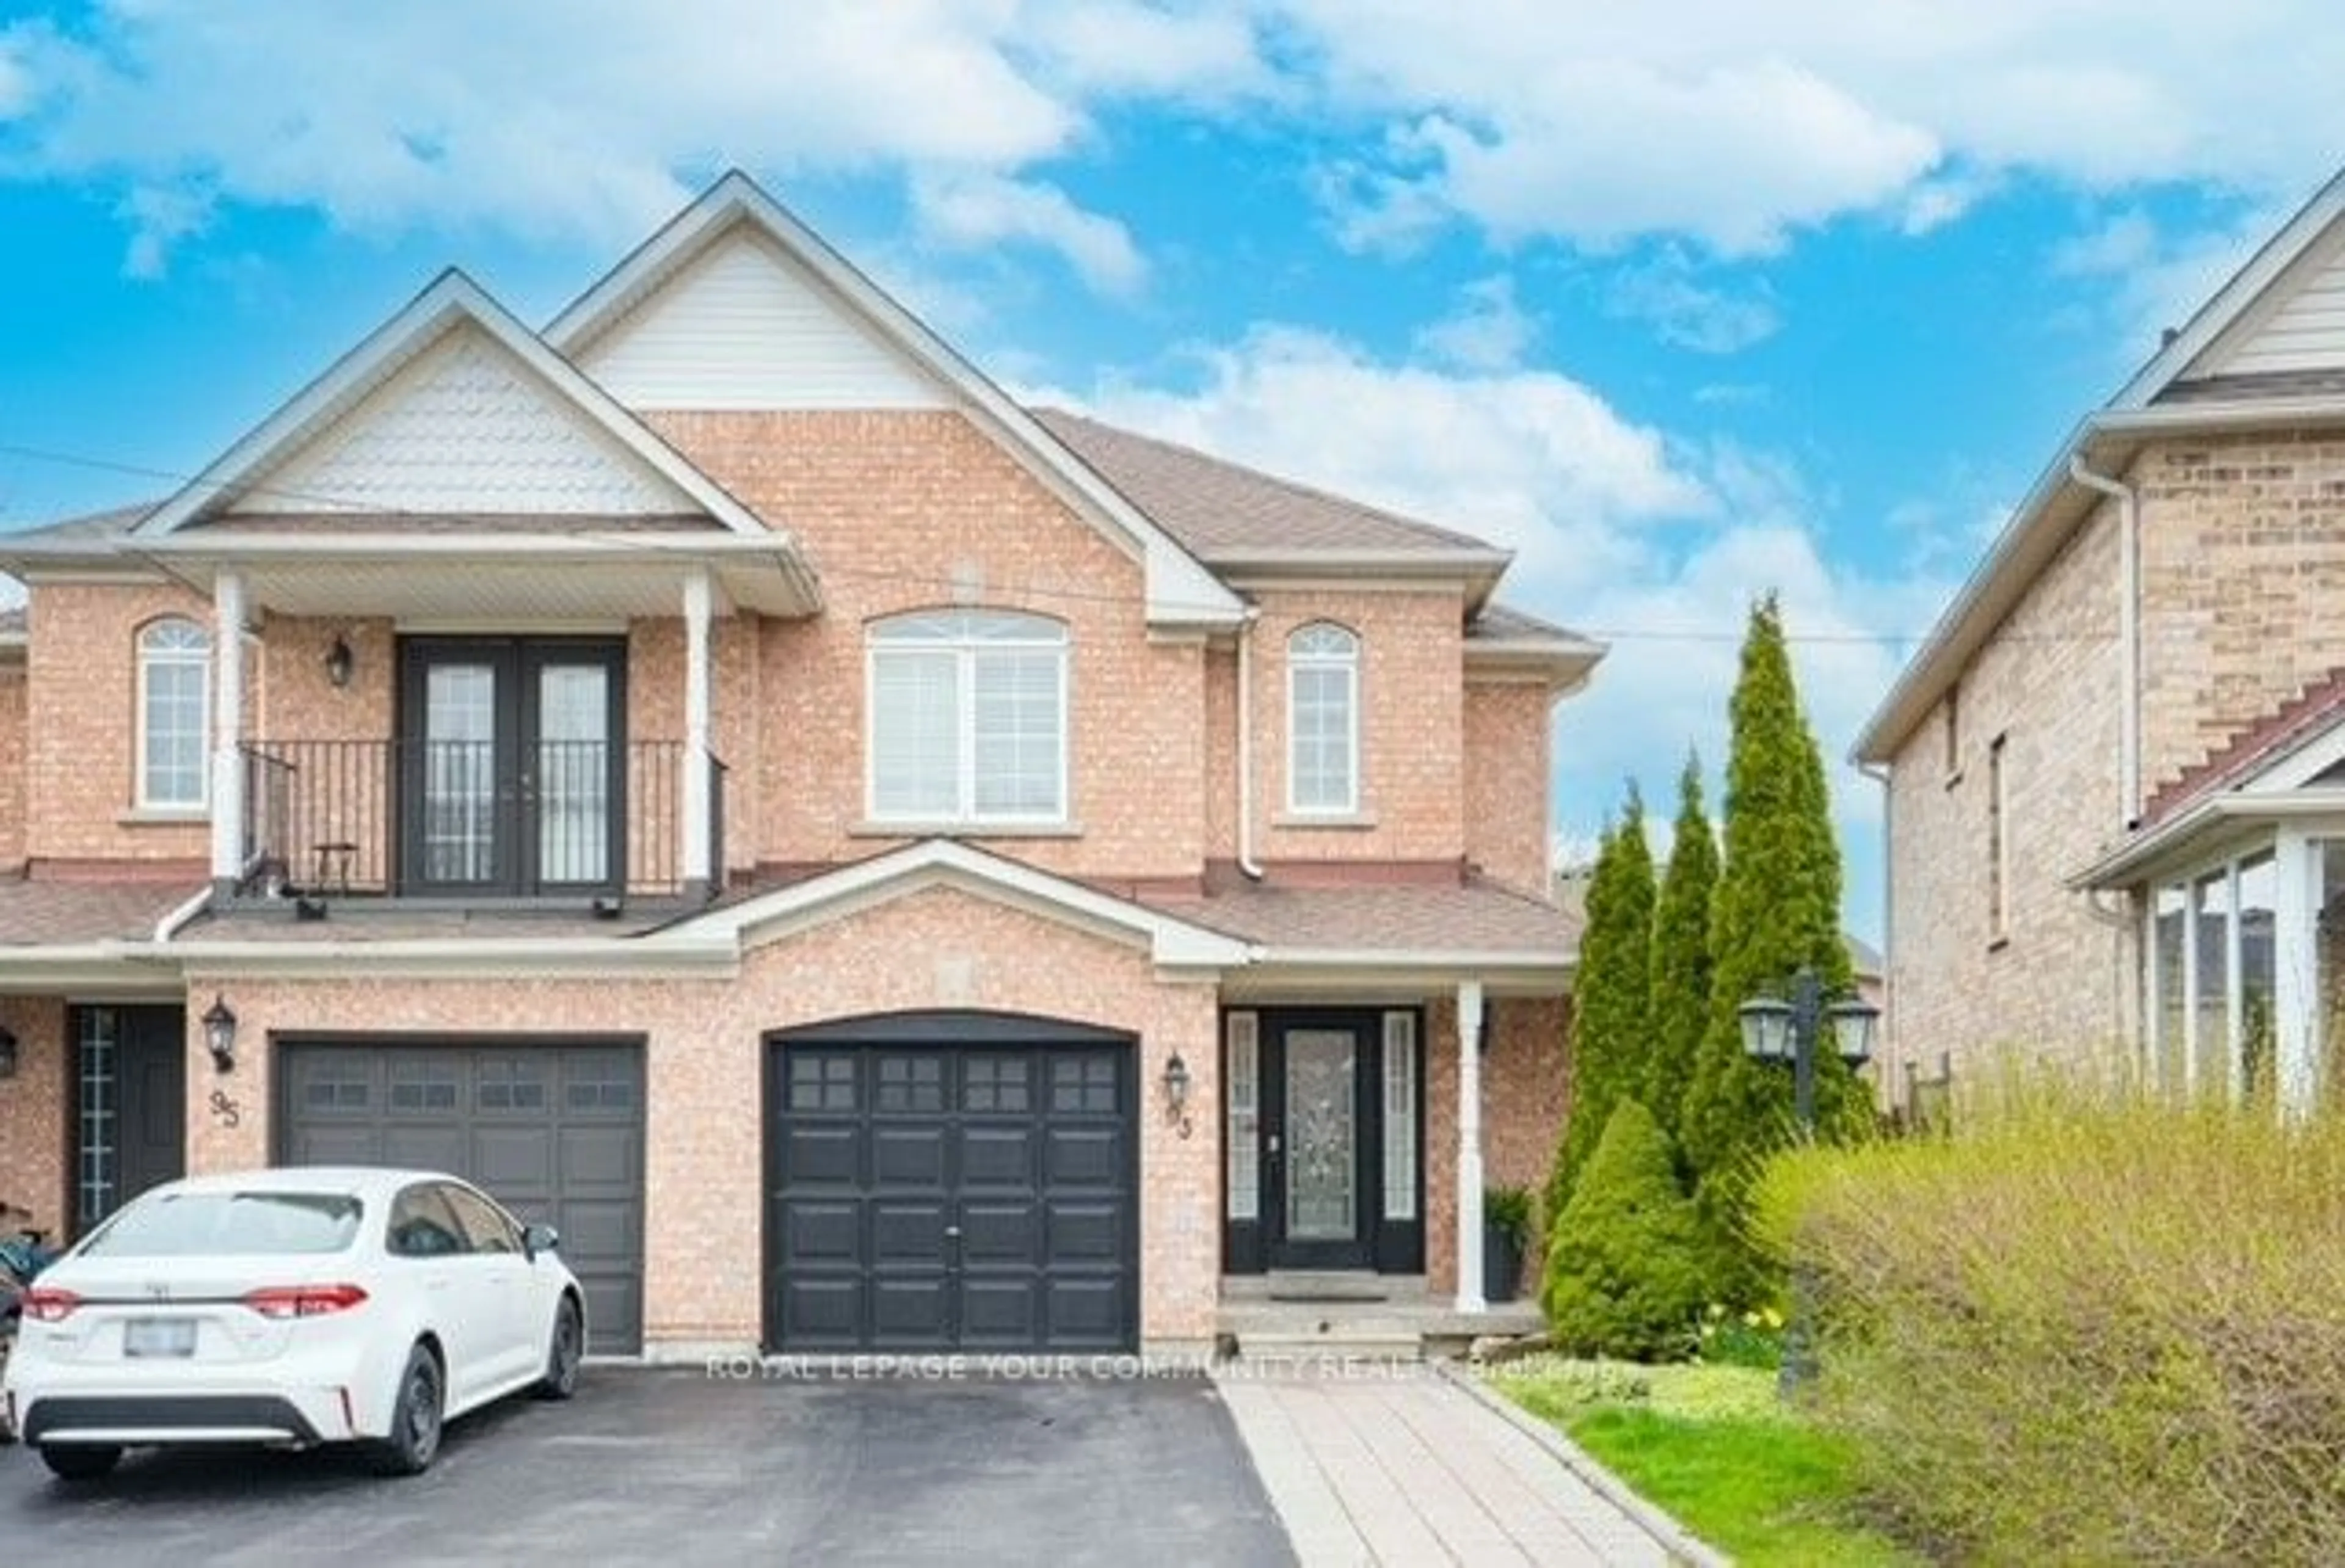 Home with brick exterior material for 93 Long Point Dr, Richmond Hill Ontario L4E 3Z7